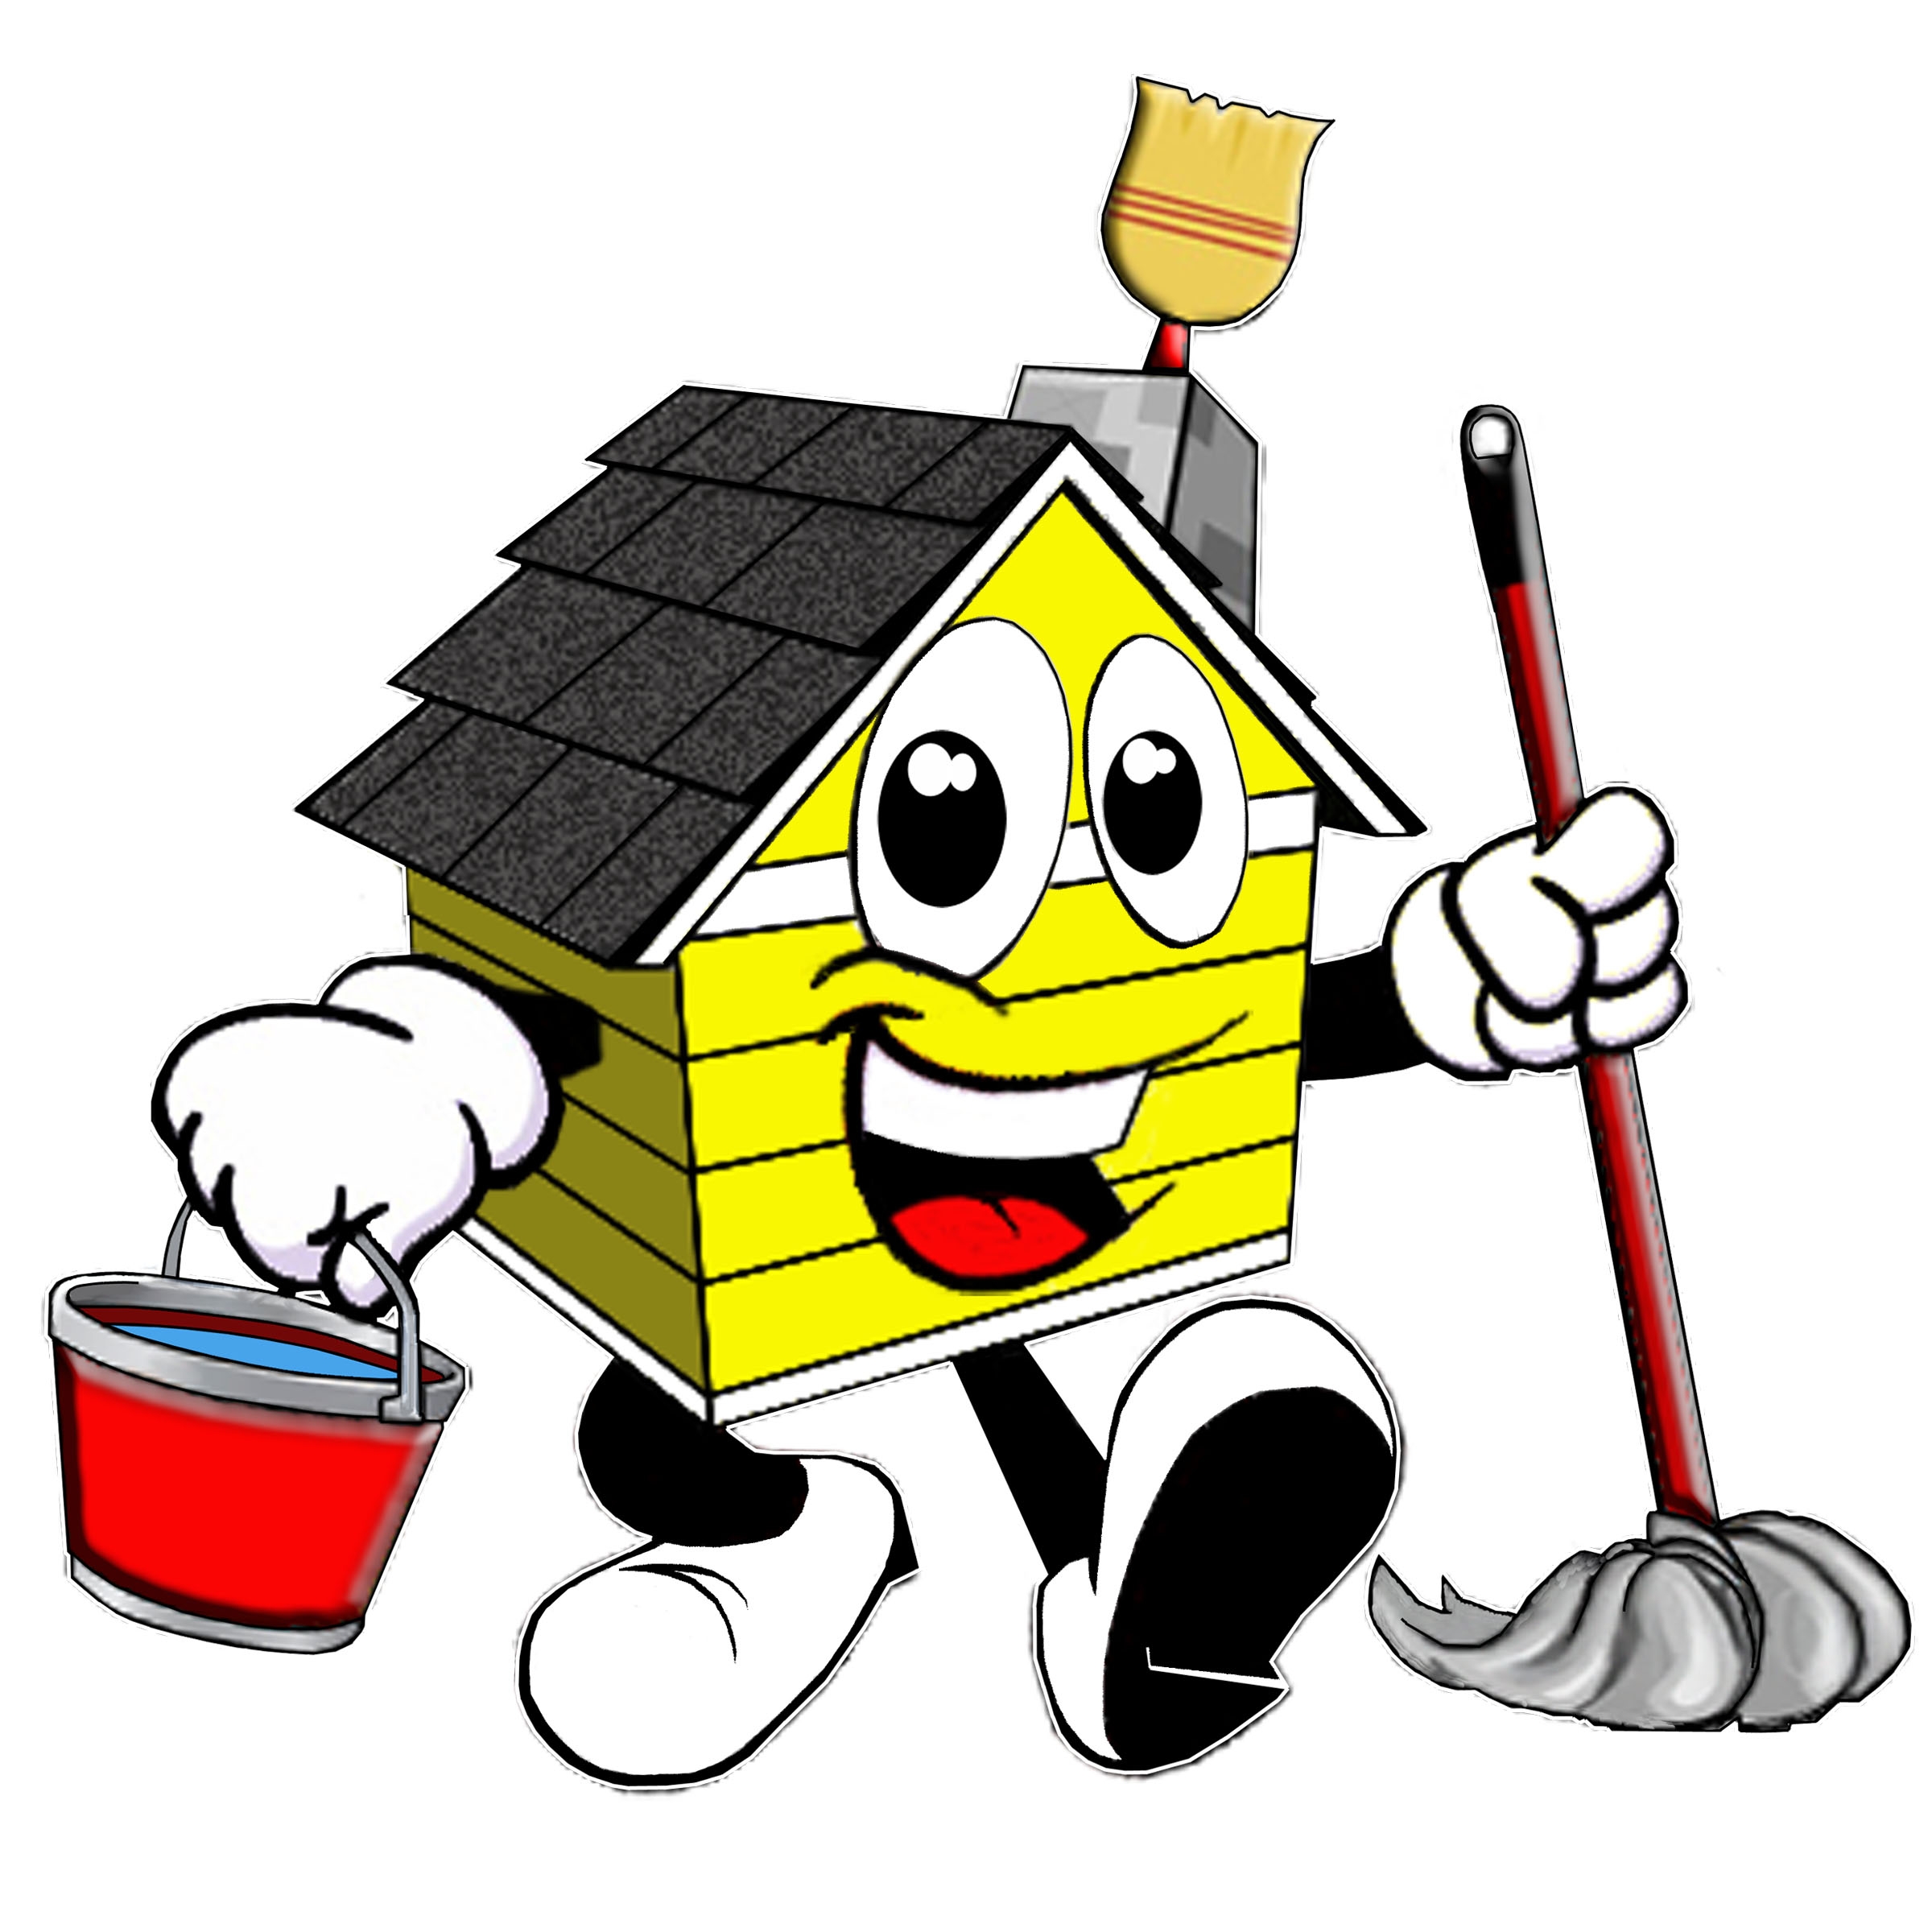 microsoft office clipart house - photo #35